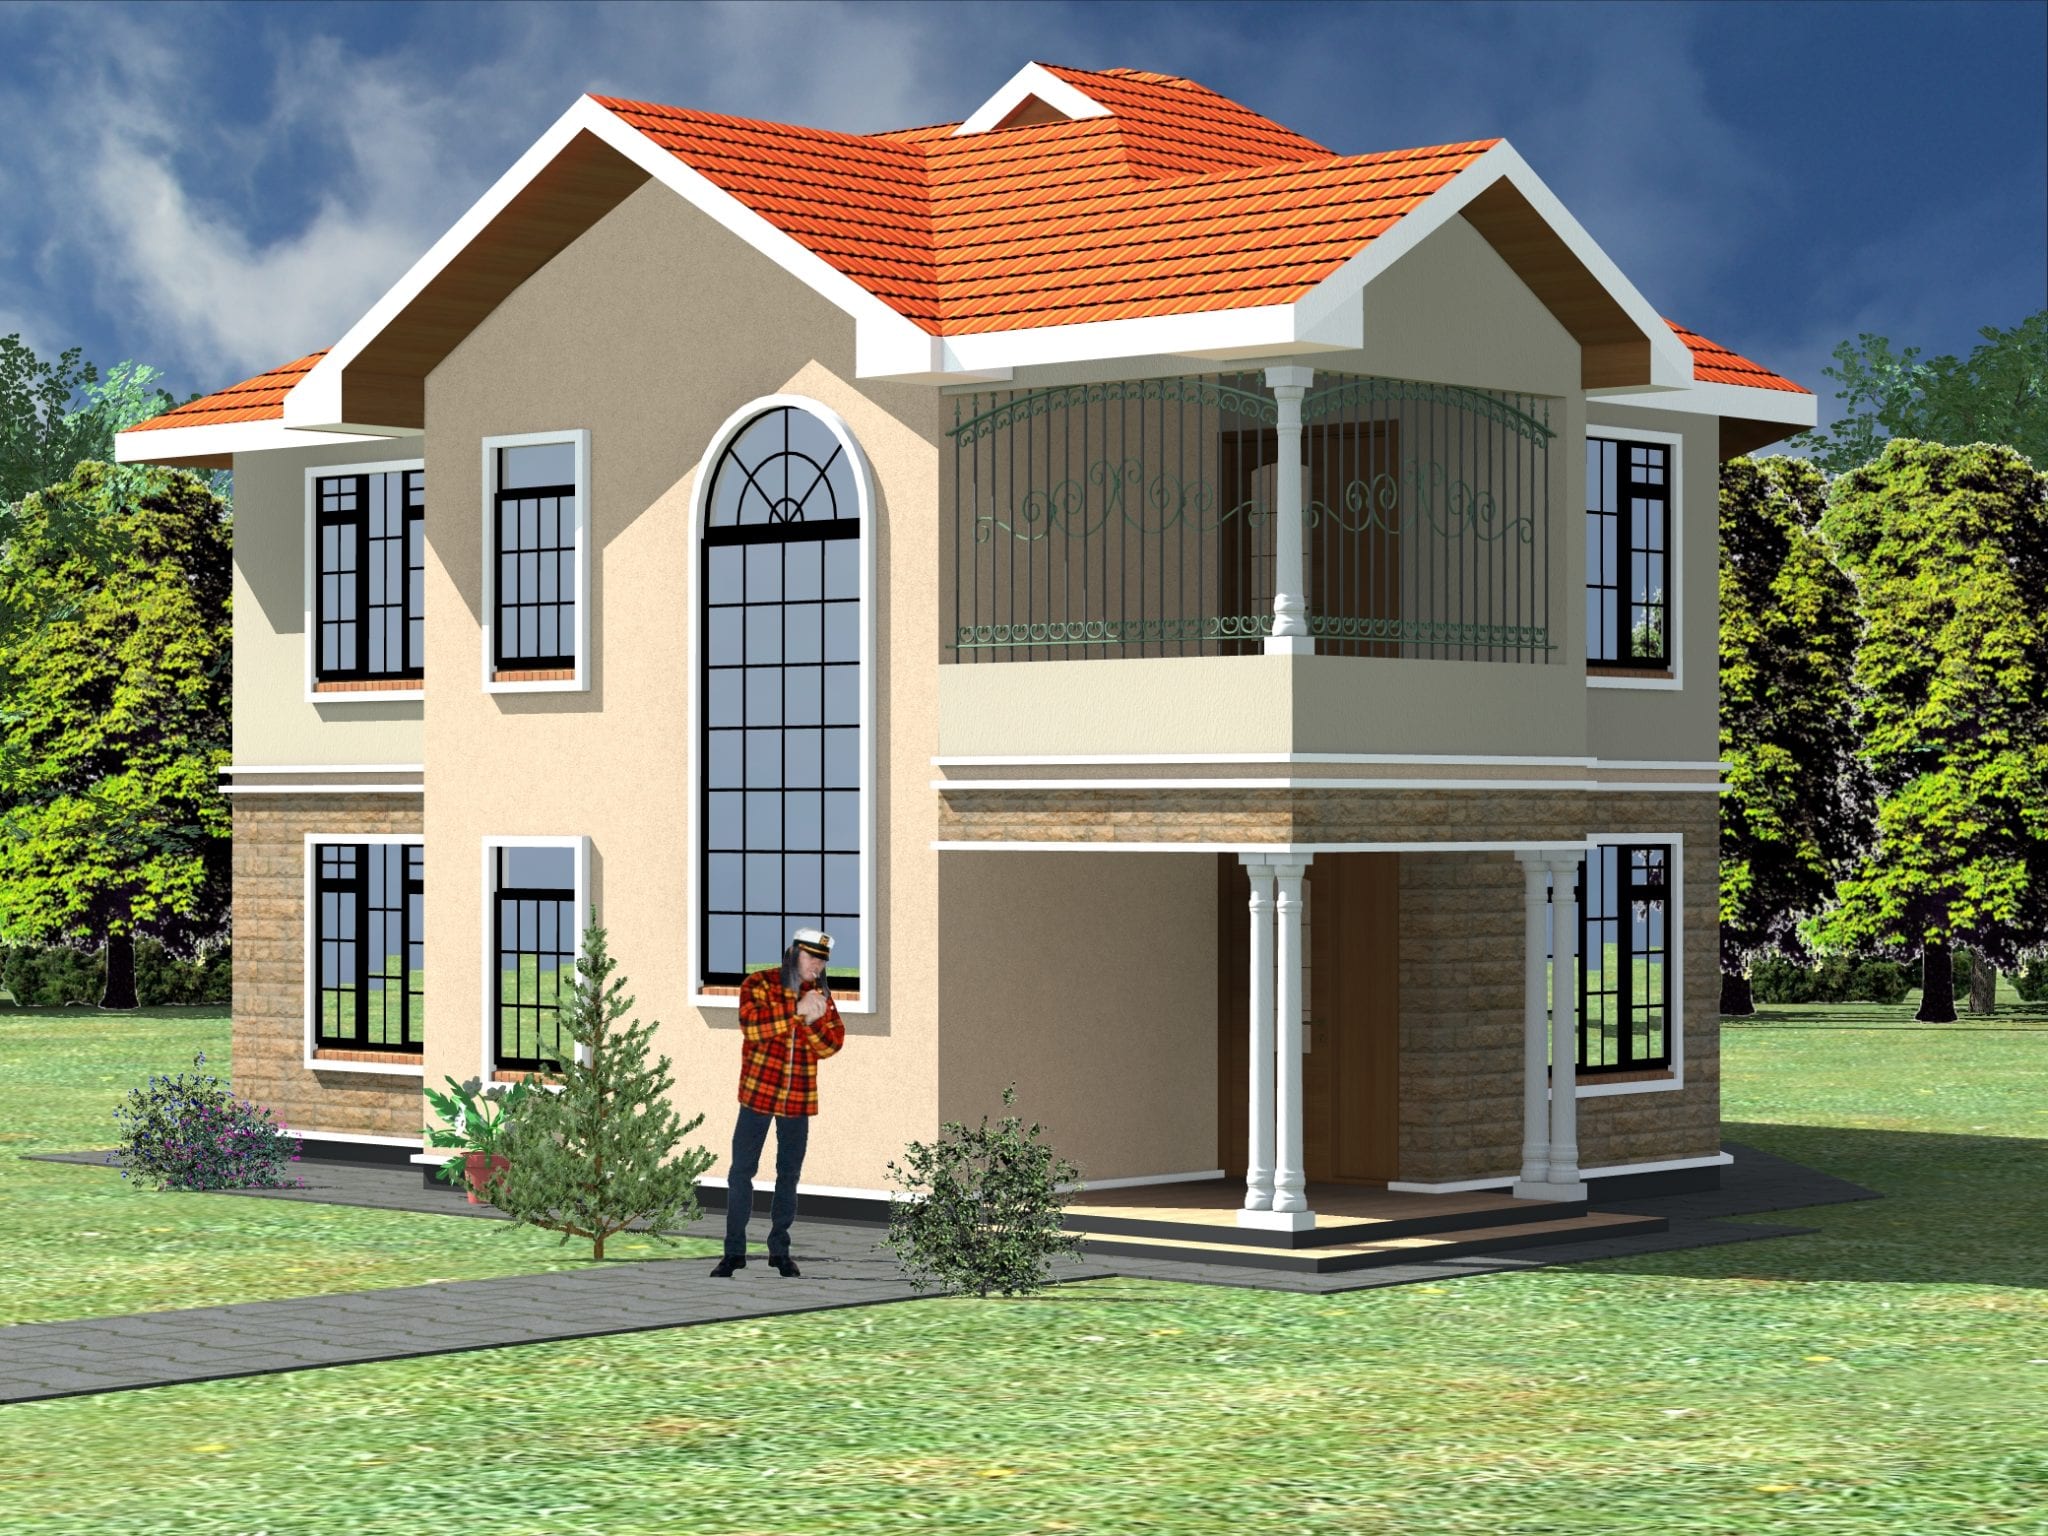 Two Bedroom House Plans In Kenya Today / Enchanting house 2 bedroom